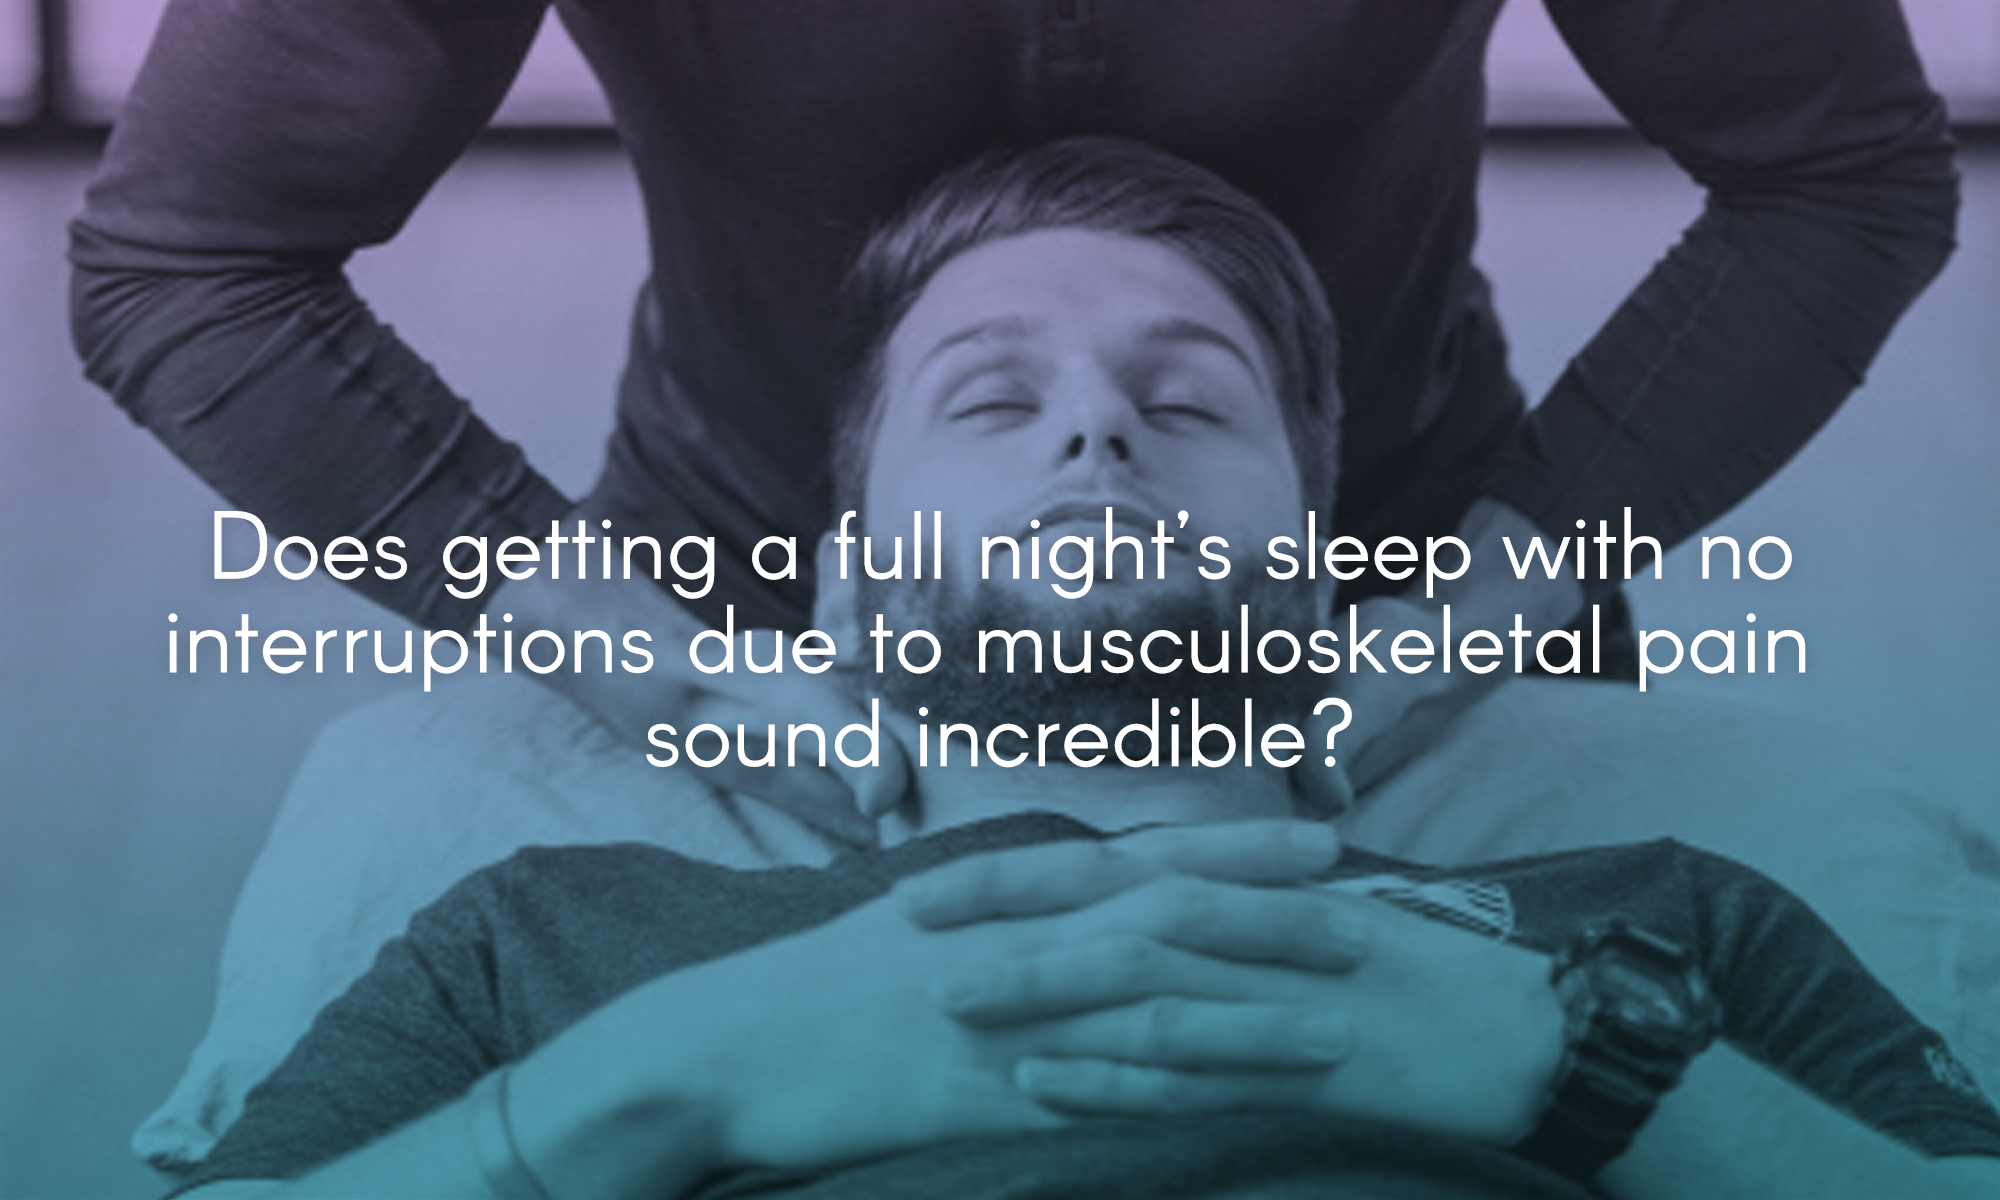  Does getting a full night’s sleep with no interruptions due to musculoskeletal pain sound incredible? 